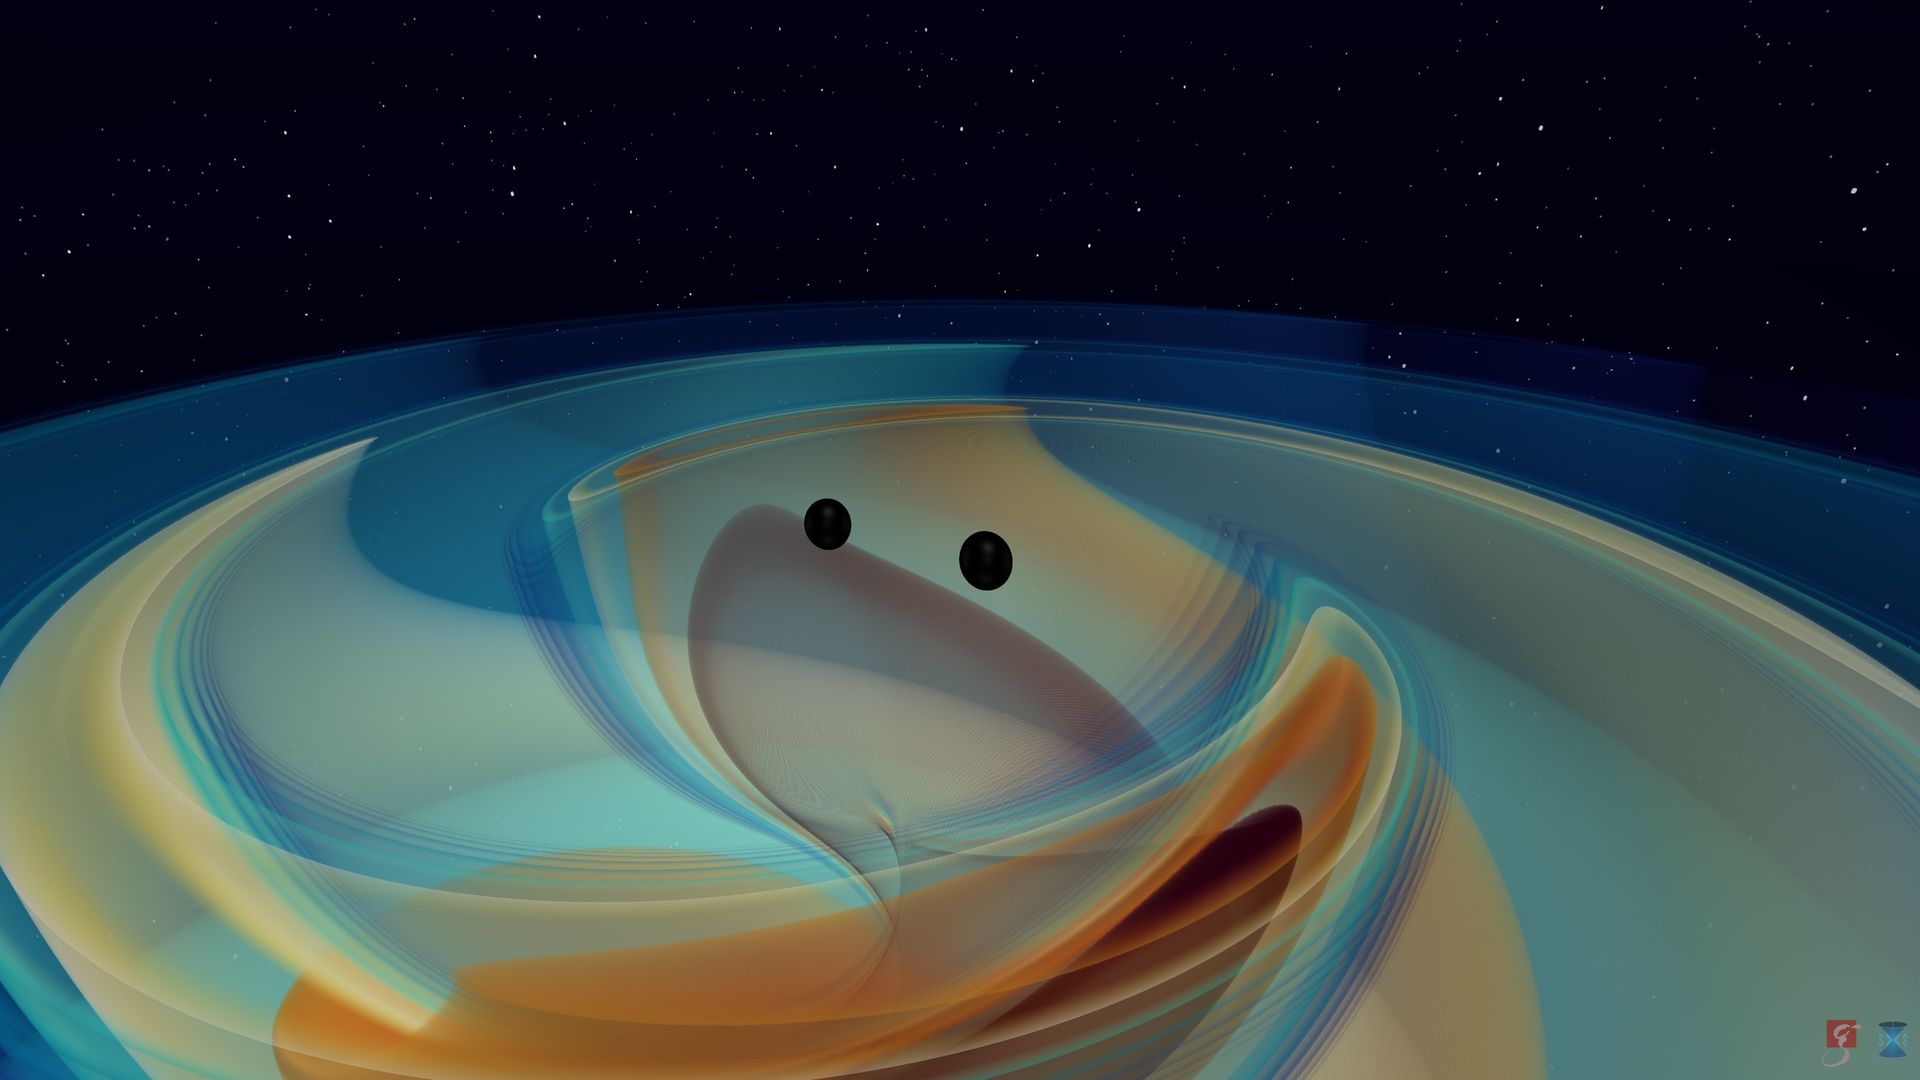 Simulation of two black holes merging